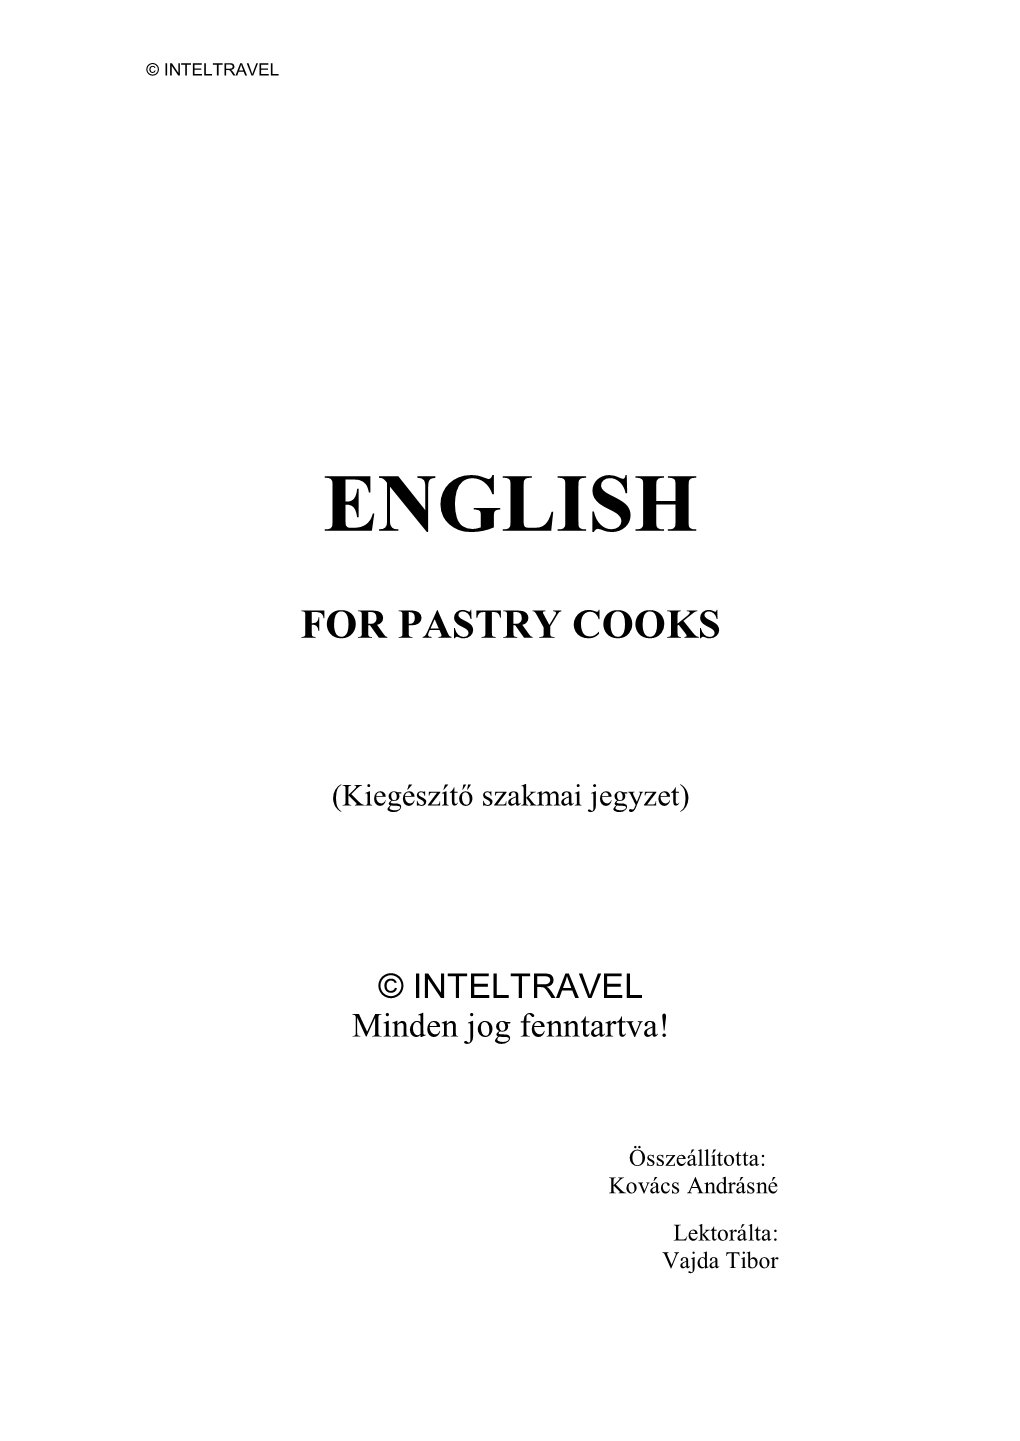 English for Pastry Cooks